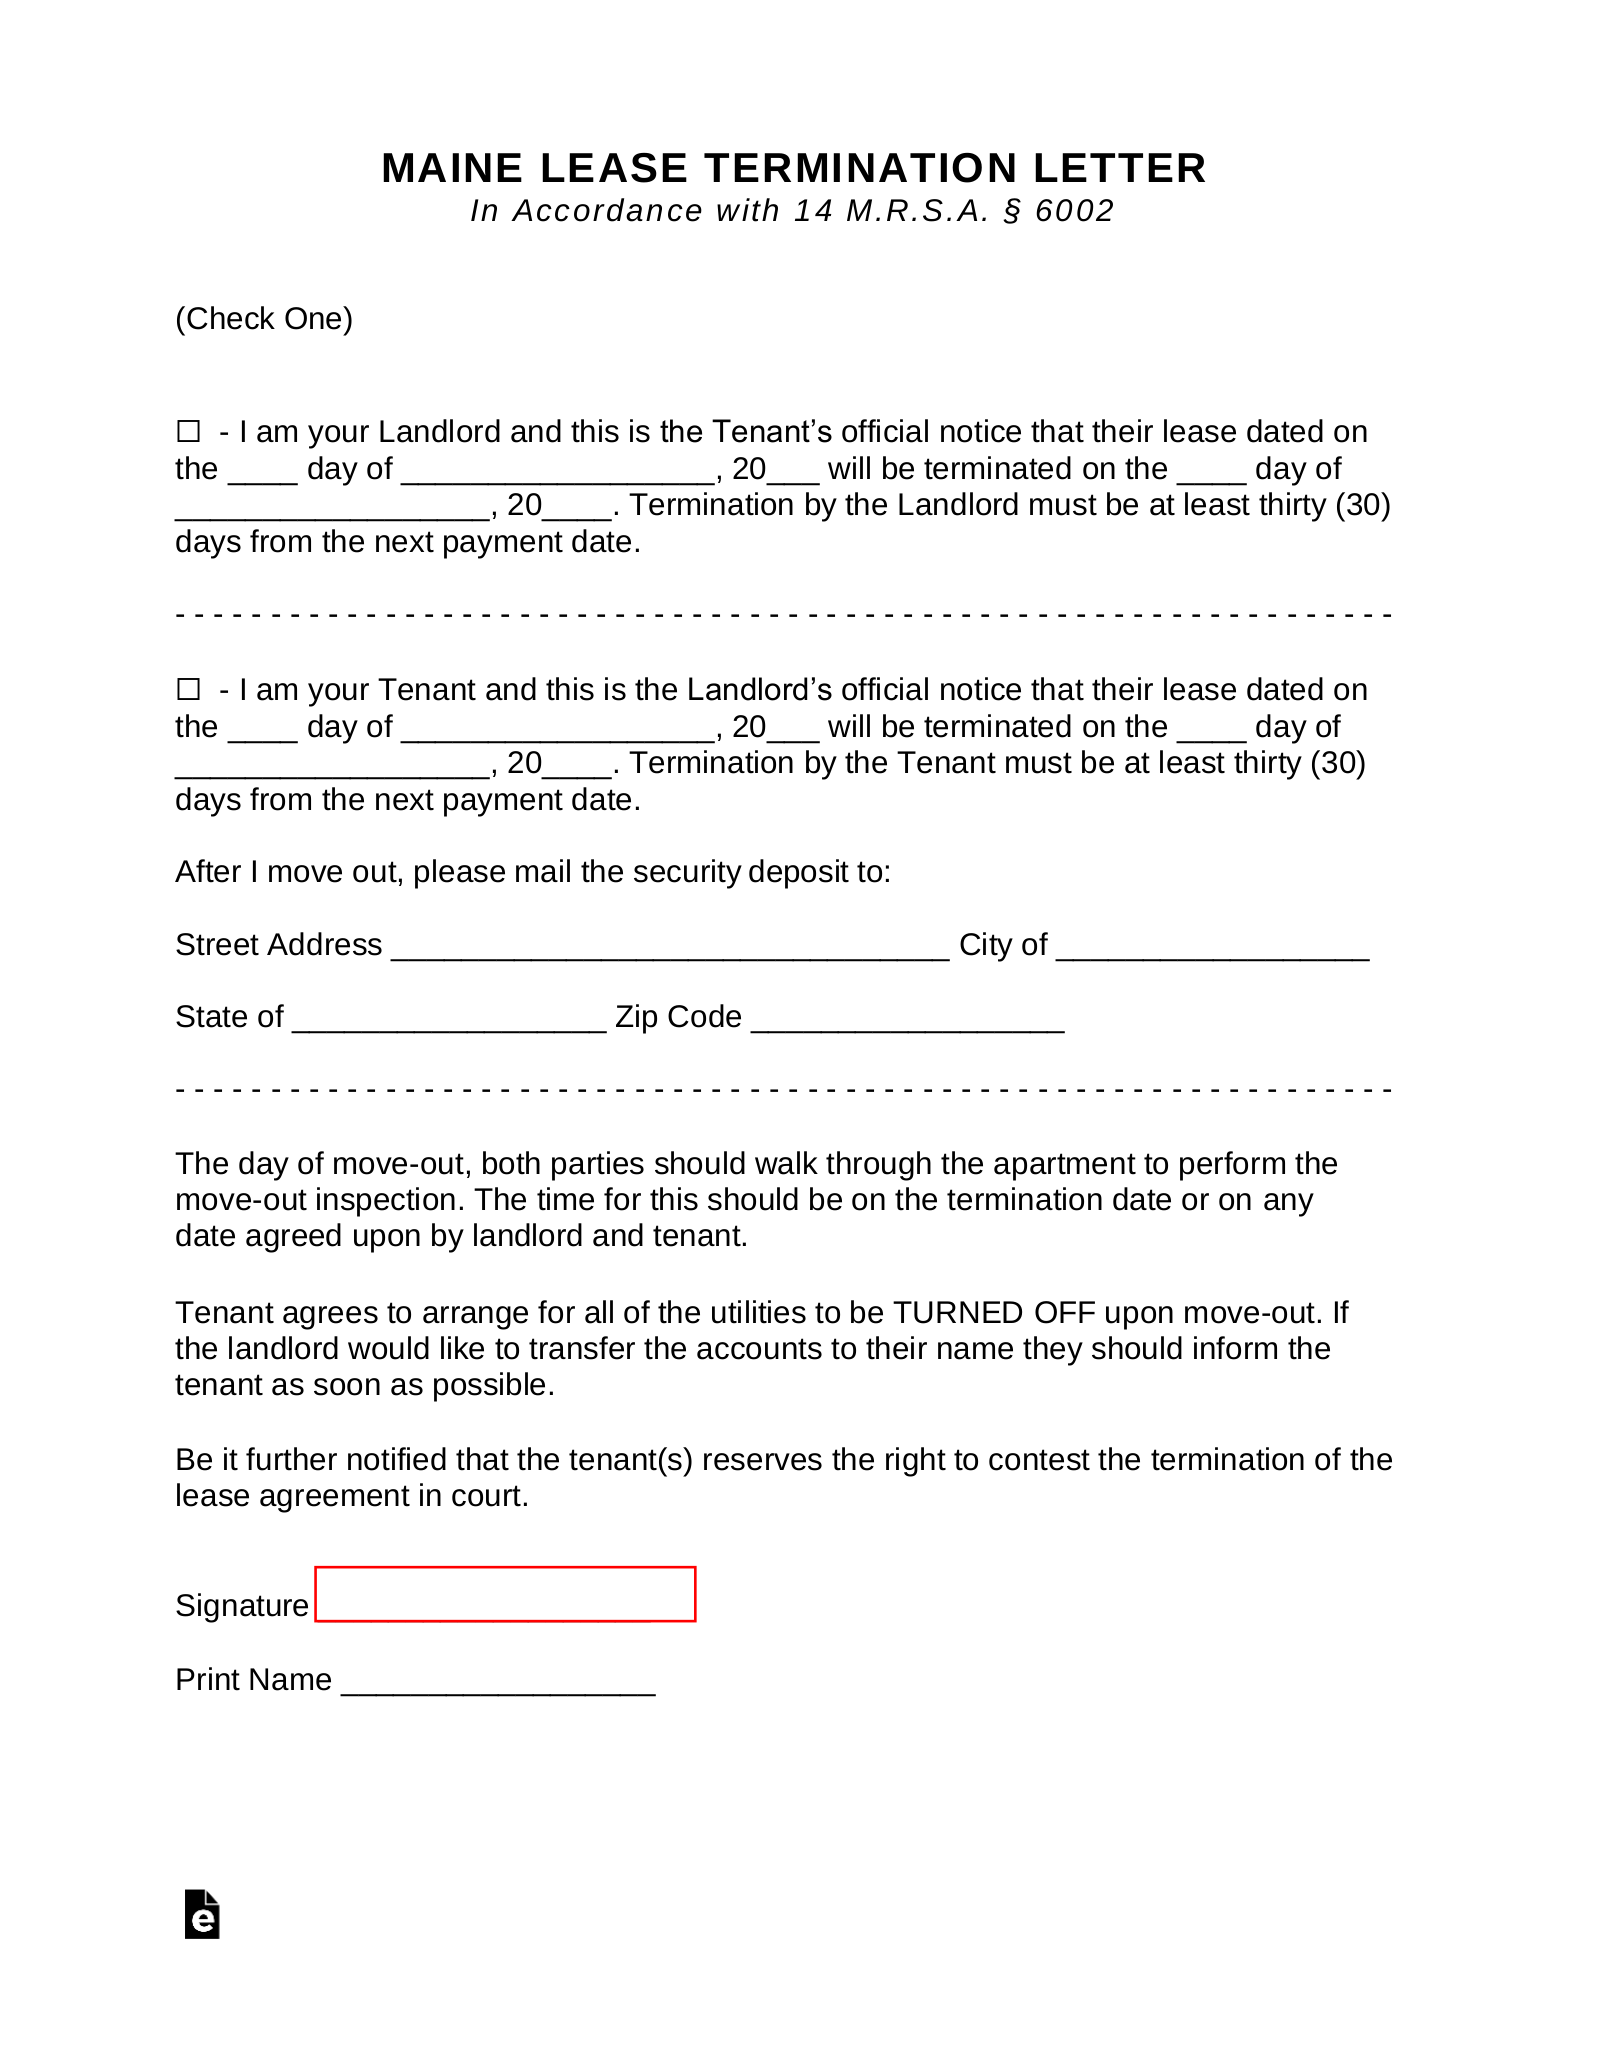 Maine Lease Termination Letter Form | 30-Day Notice